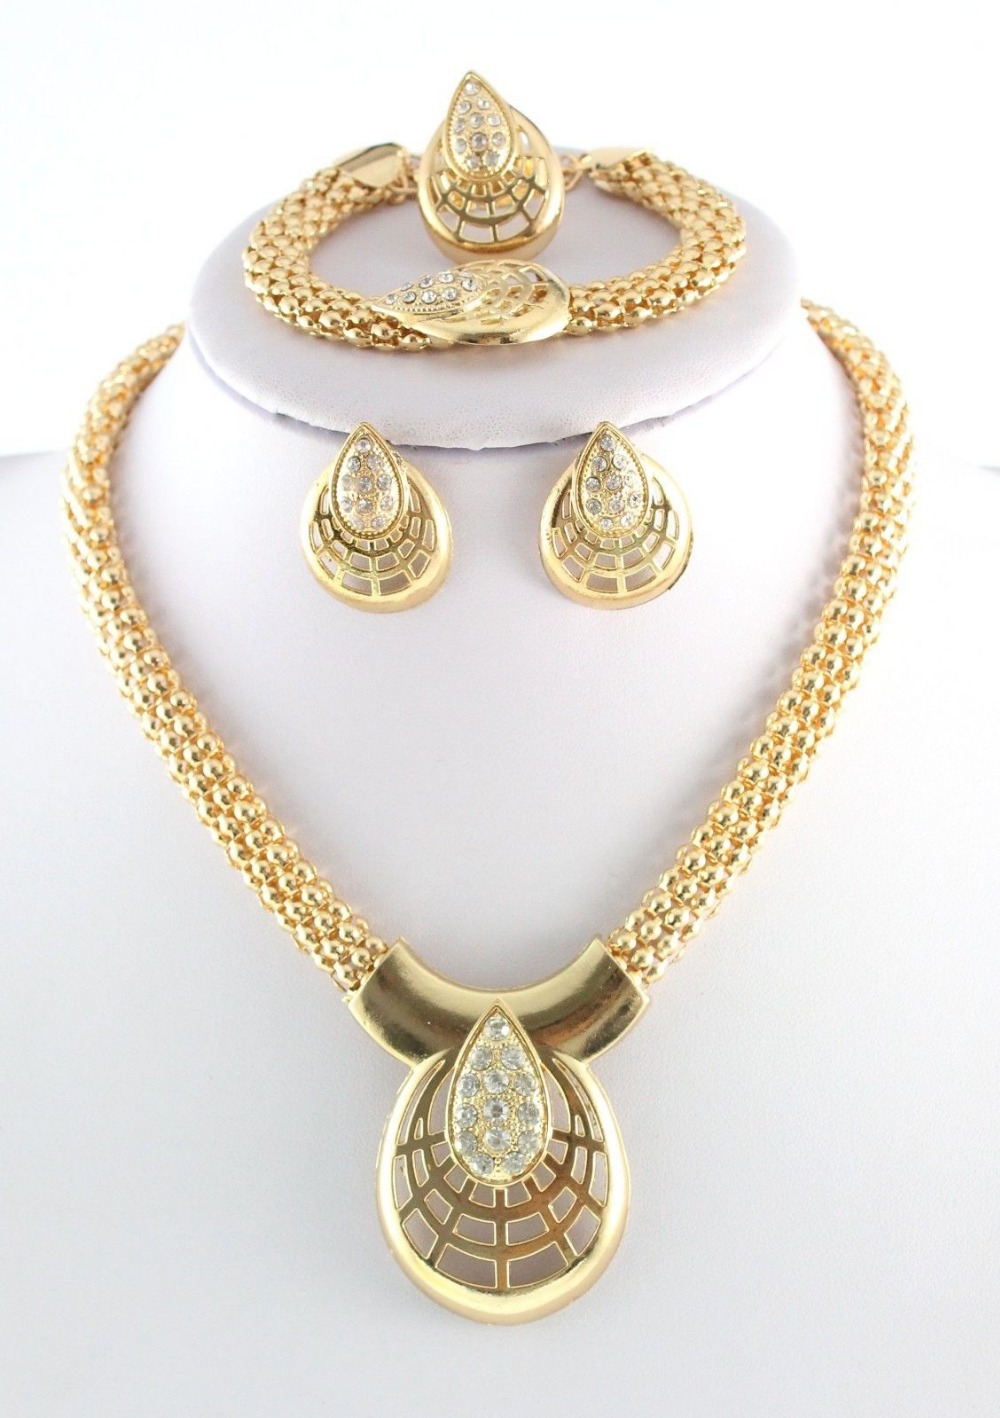 ... 18k Gold Plated Crystal Necklace Bracelet Ring Earring Jewelry Sets